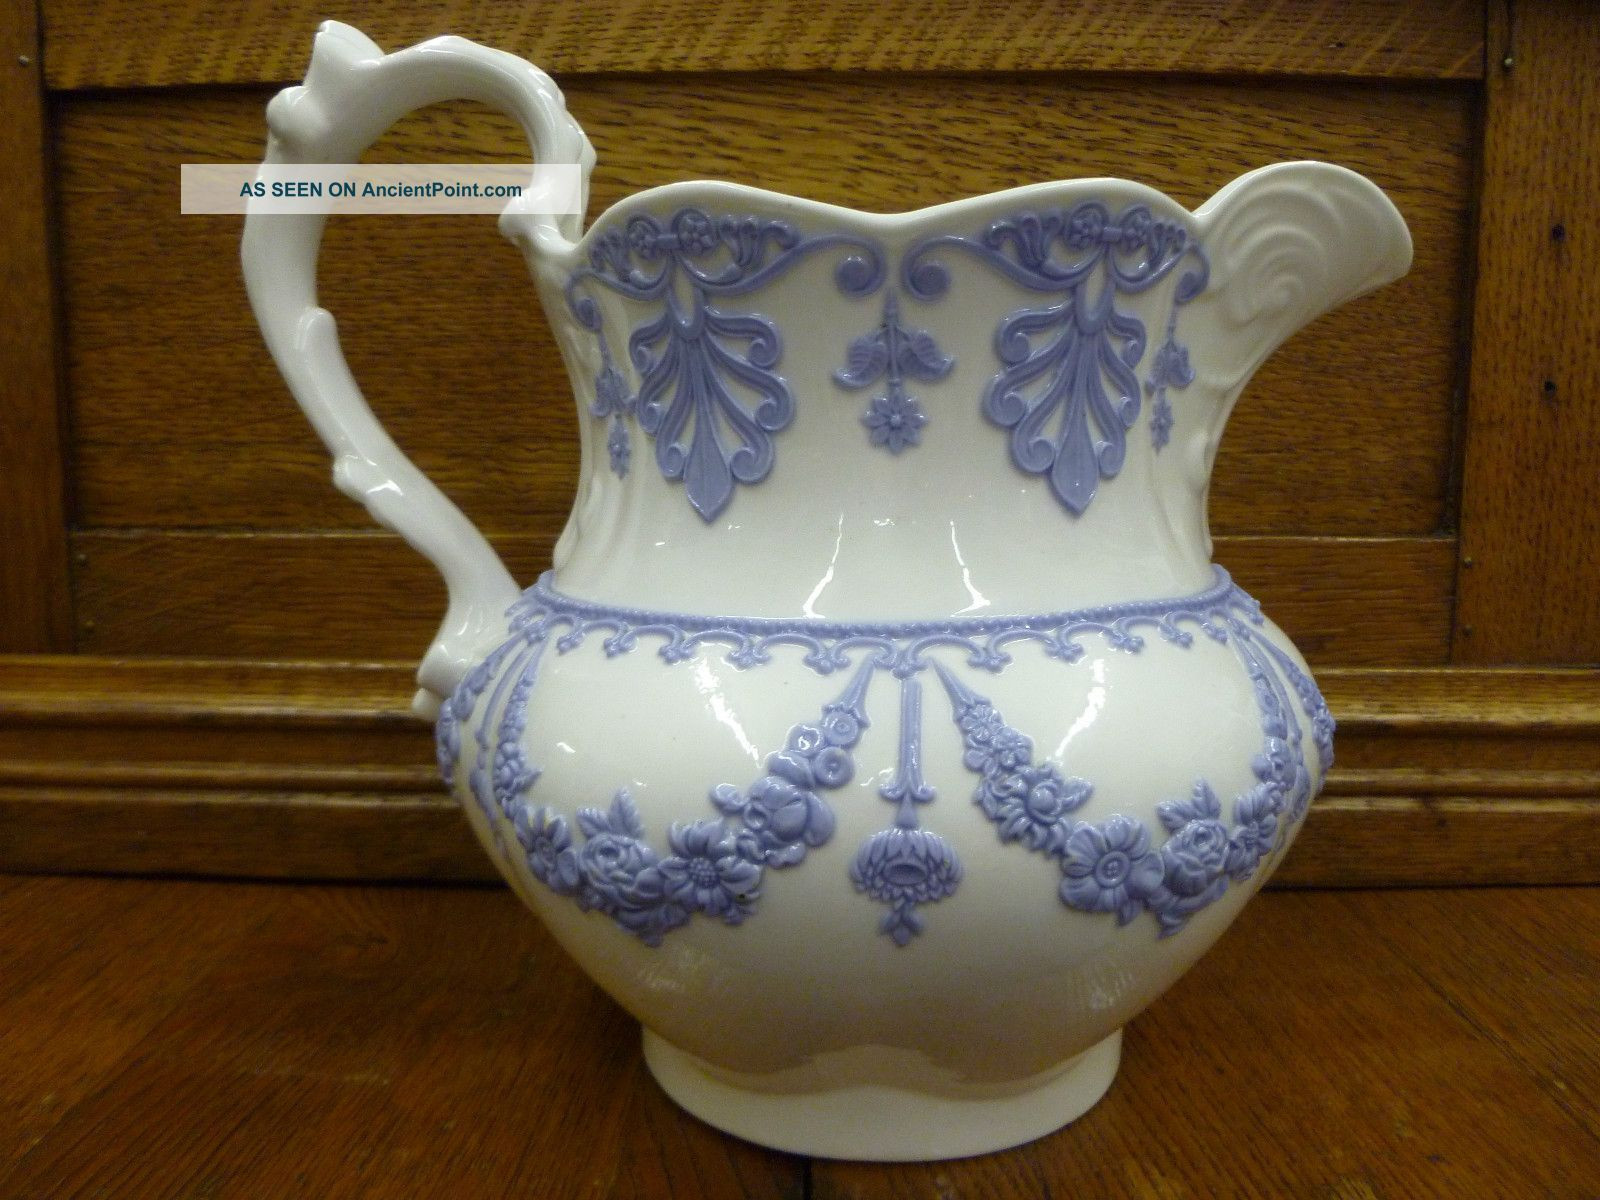 29 Lovable Wedgwood Vase Blue and White 2024 free download wedgwood vase blue and white of antique milk or water pitchers antique blue white 1800 s water inside antique milk or water pitchers antique blue white 1800 s water milk pitcher wedgwood rid